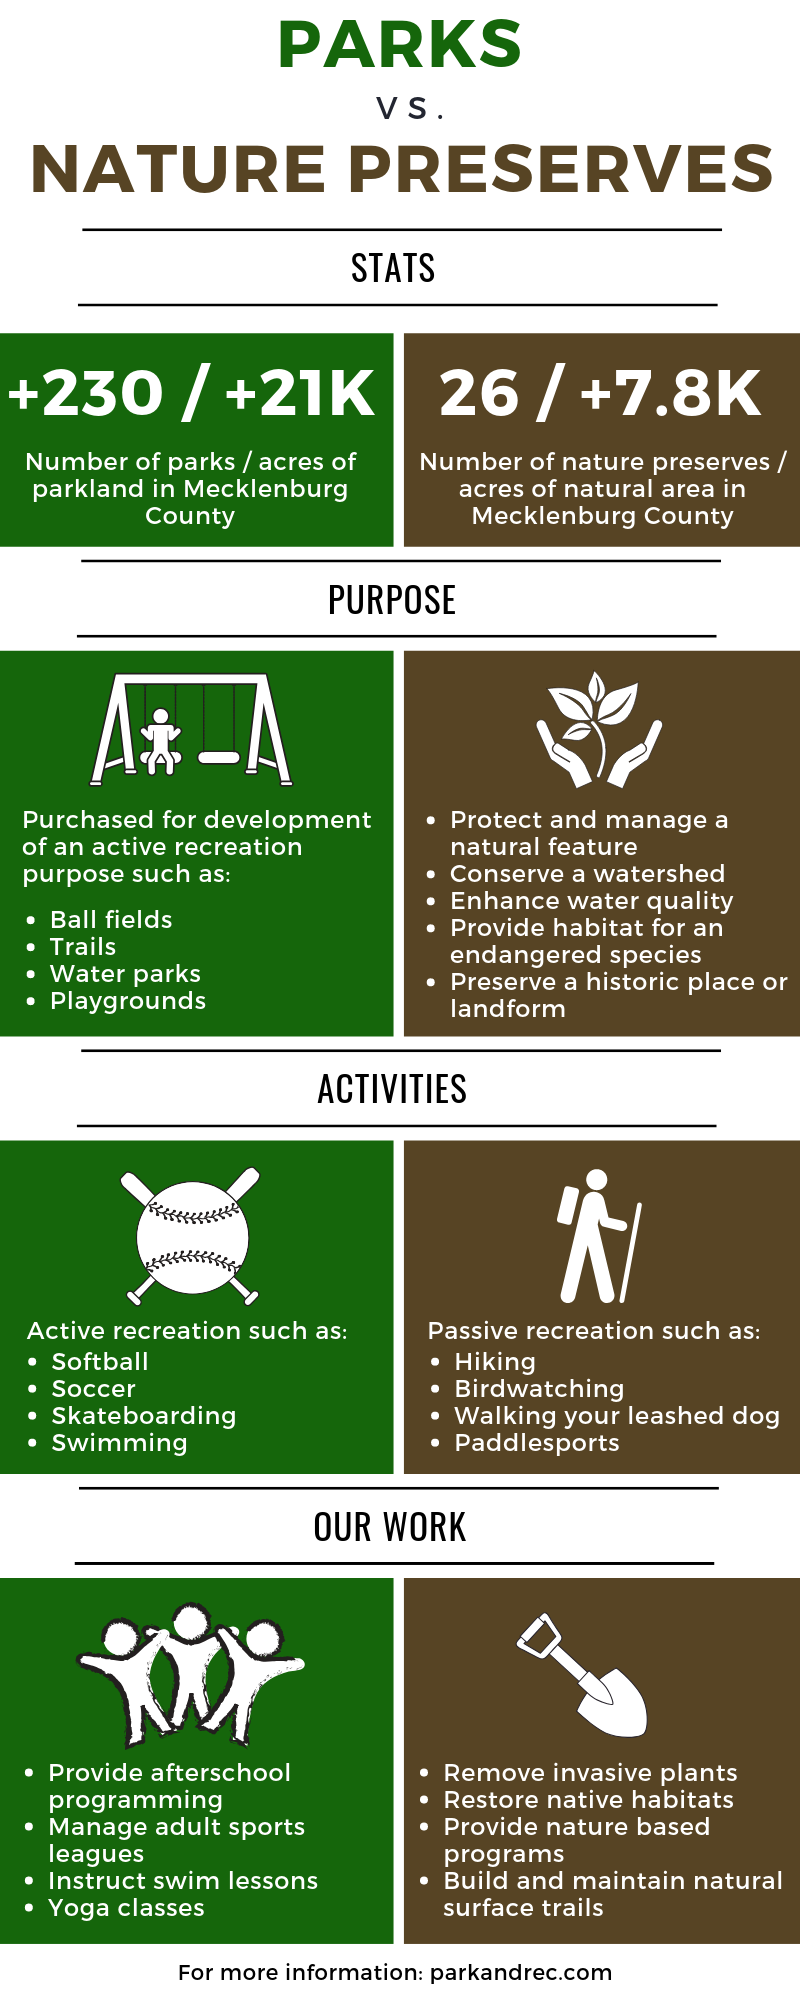 Infographic explaining the difference between parks and nature preserves, including their purposes, the activities you can do at each, and the work Park and Rec does at each.